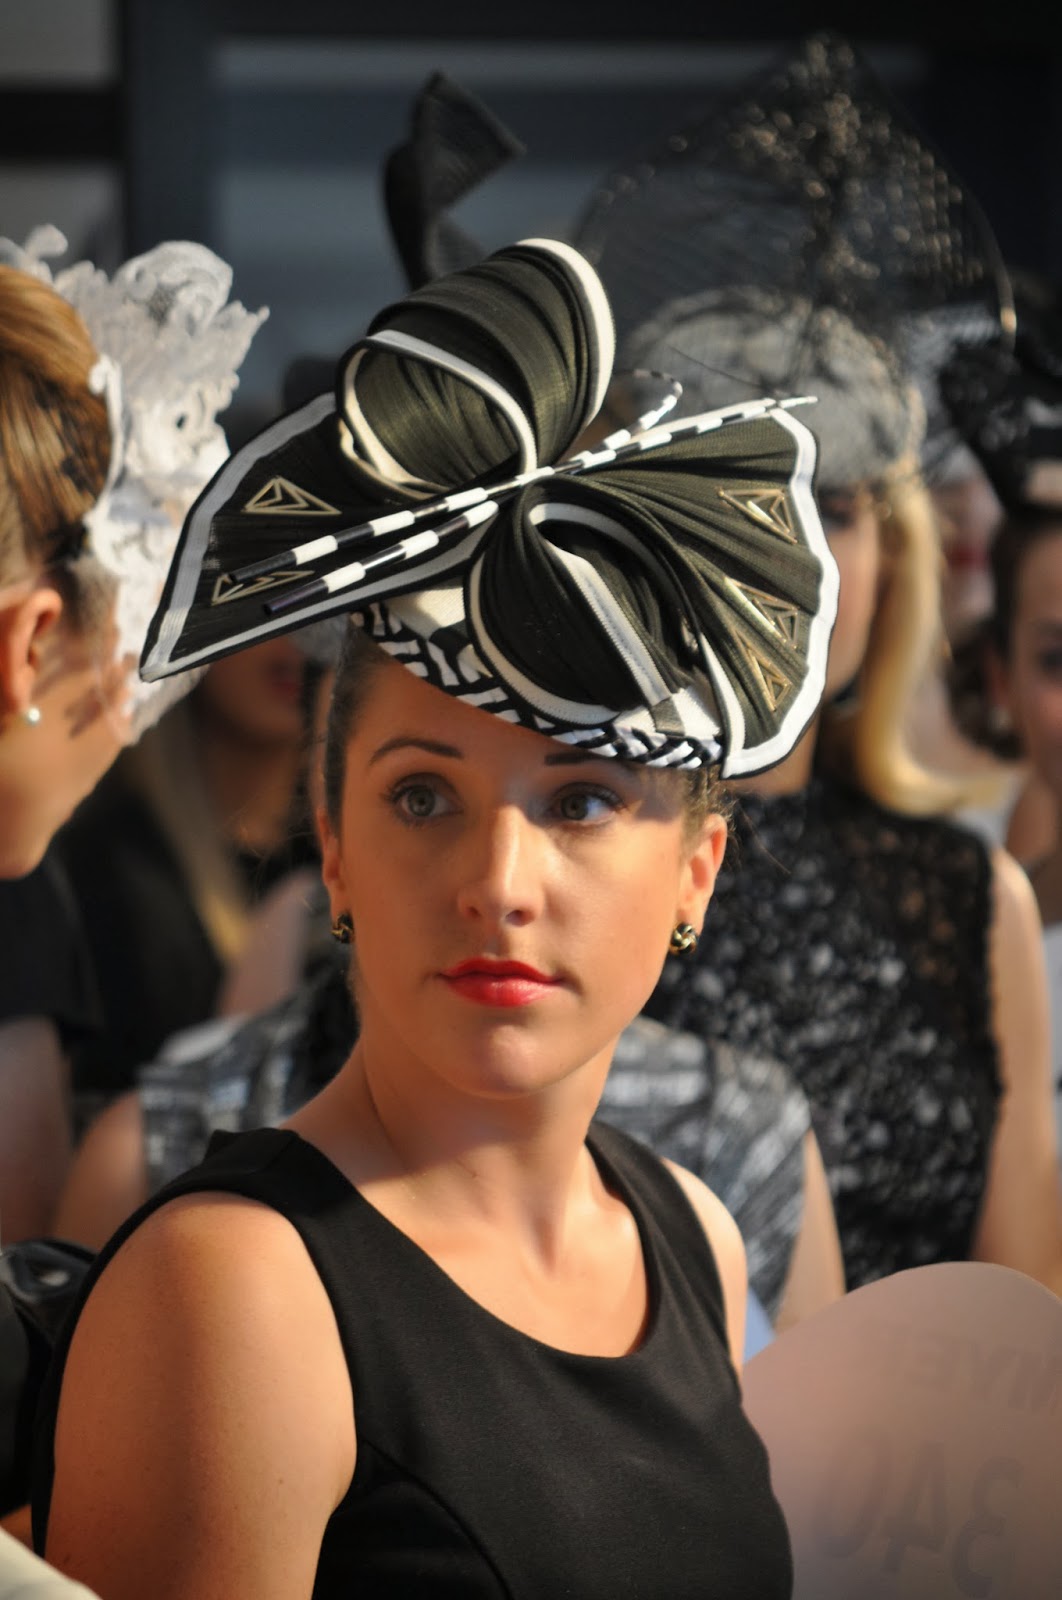 Racing Fashion: Fashions on the Field Behind the Scenes Derby Day